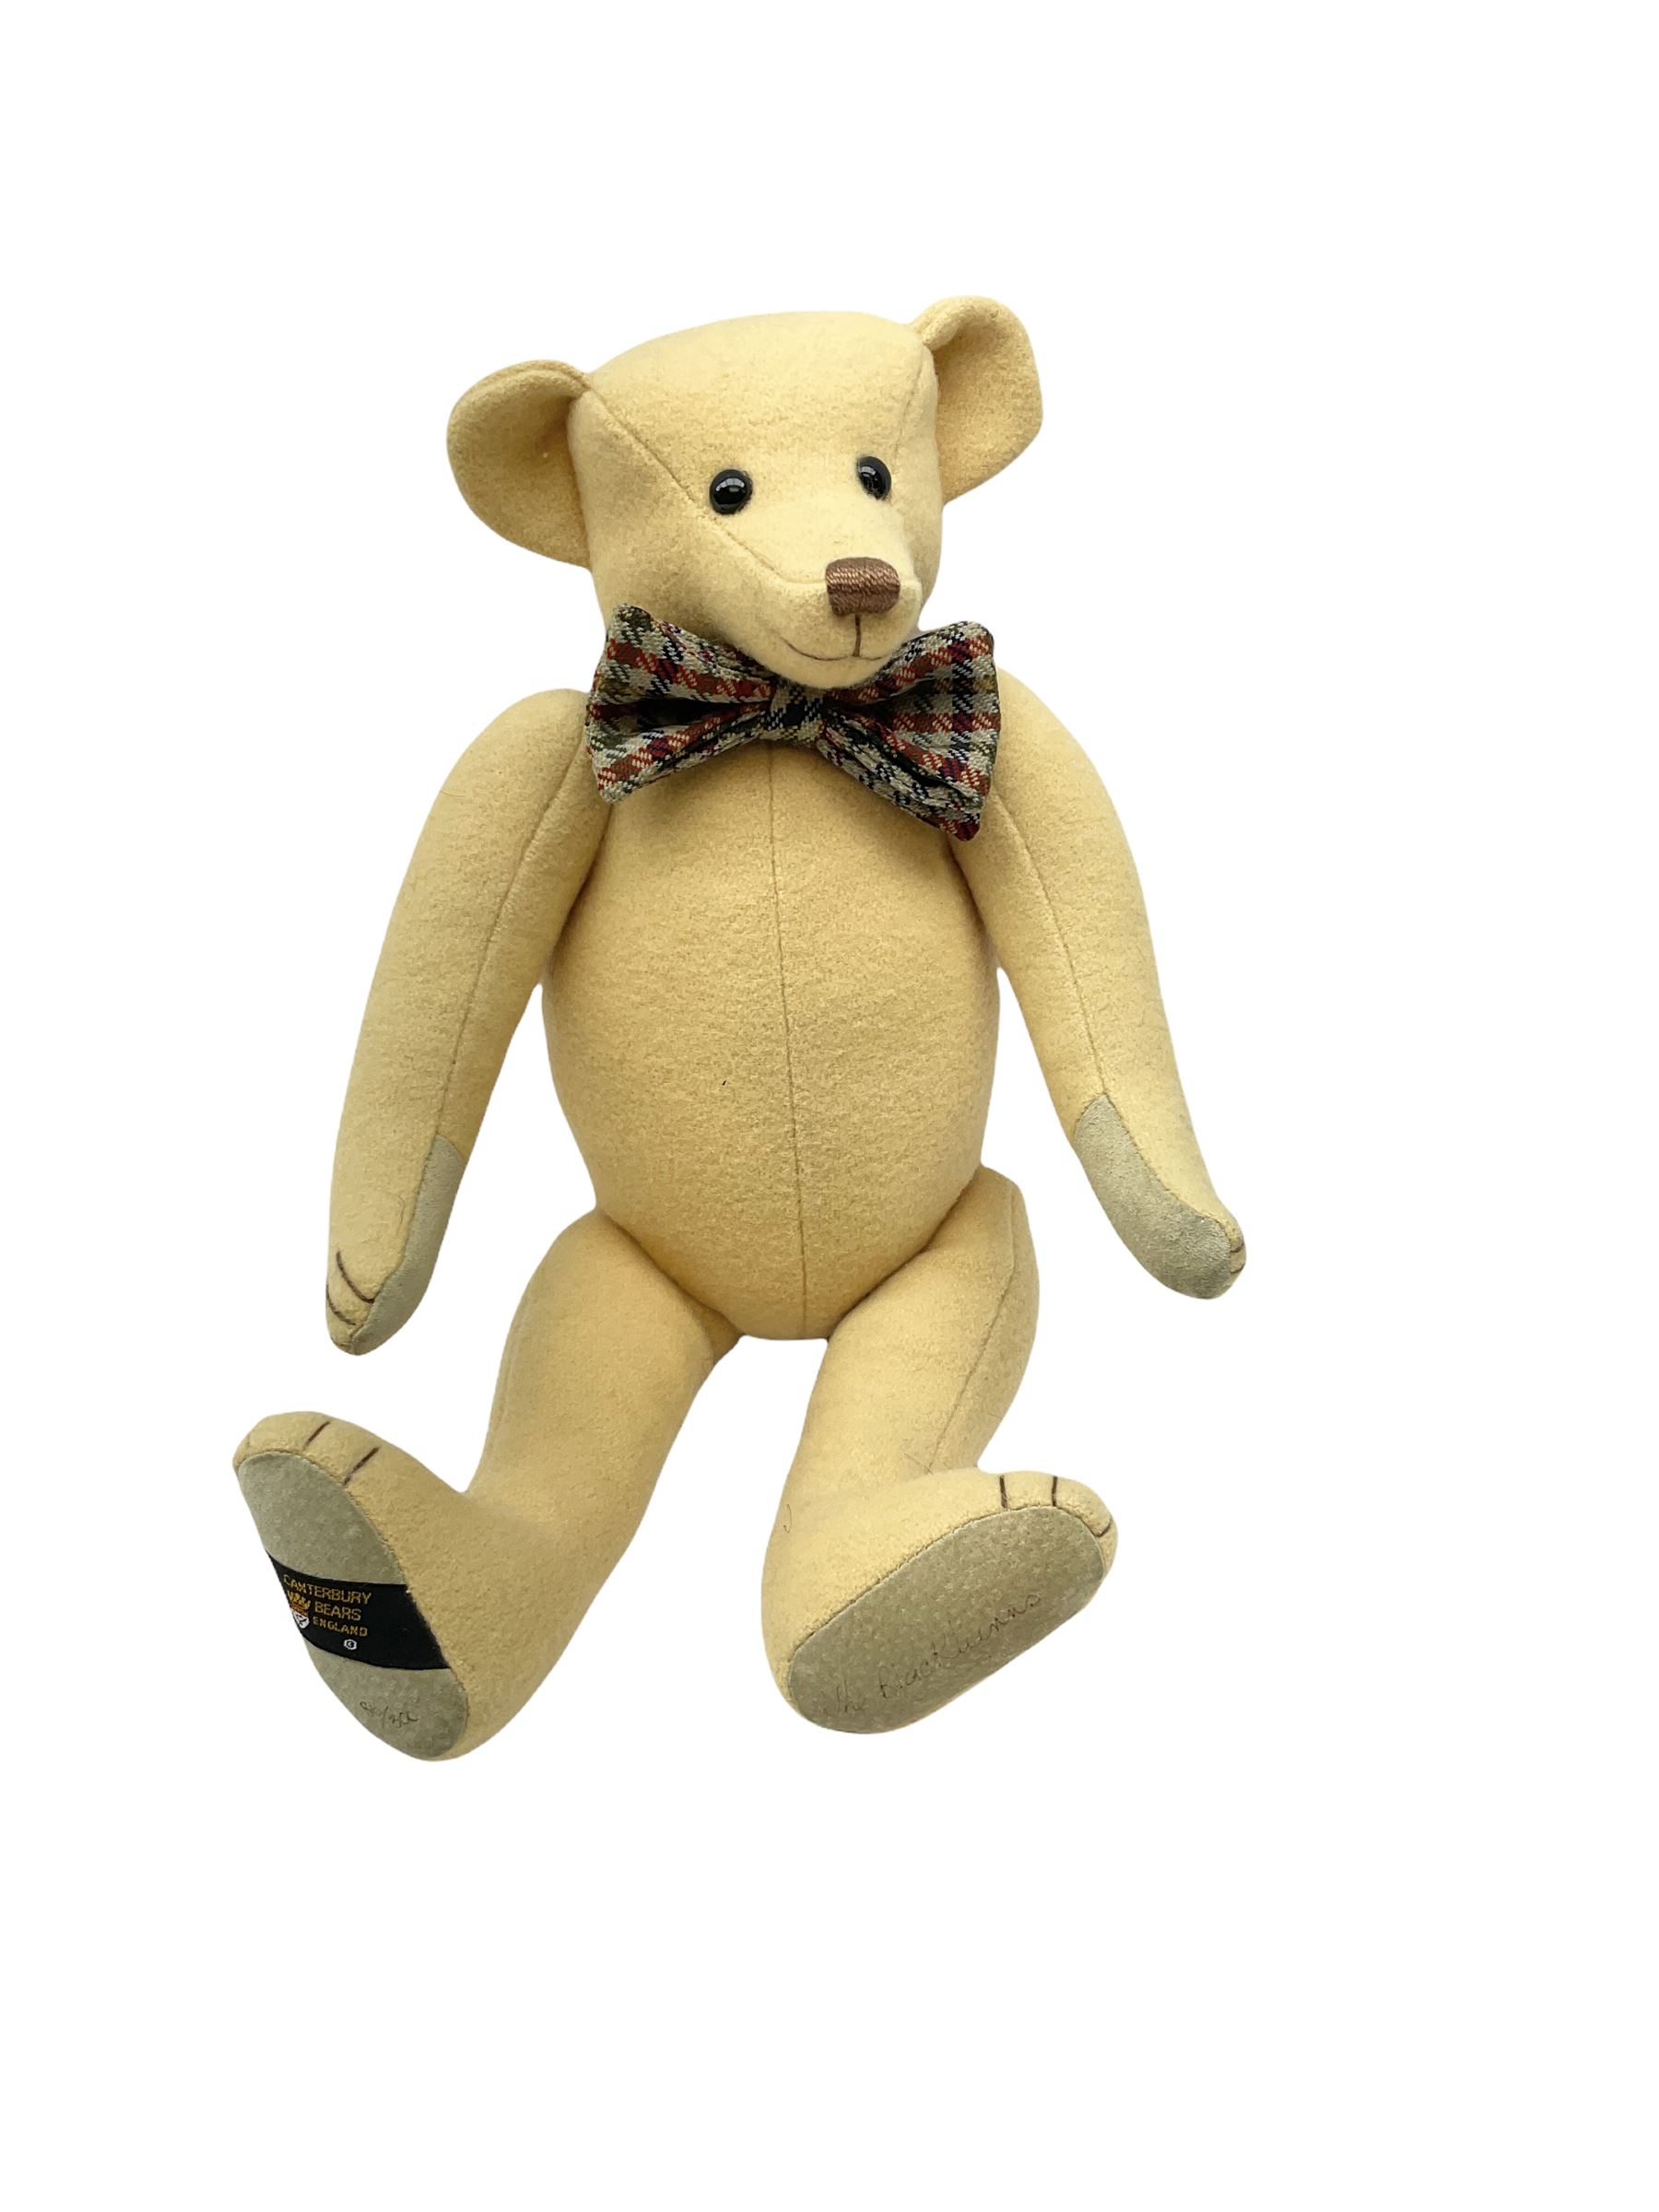 Five modern collector's teddy bears - Steiff 2001 bear No.660177 with tags; Hermann limited edition - Image 7 of 8